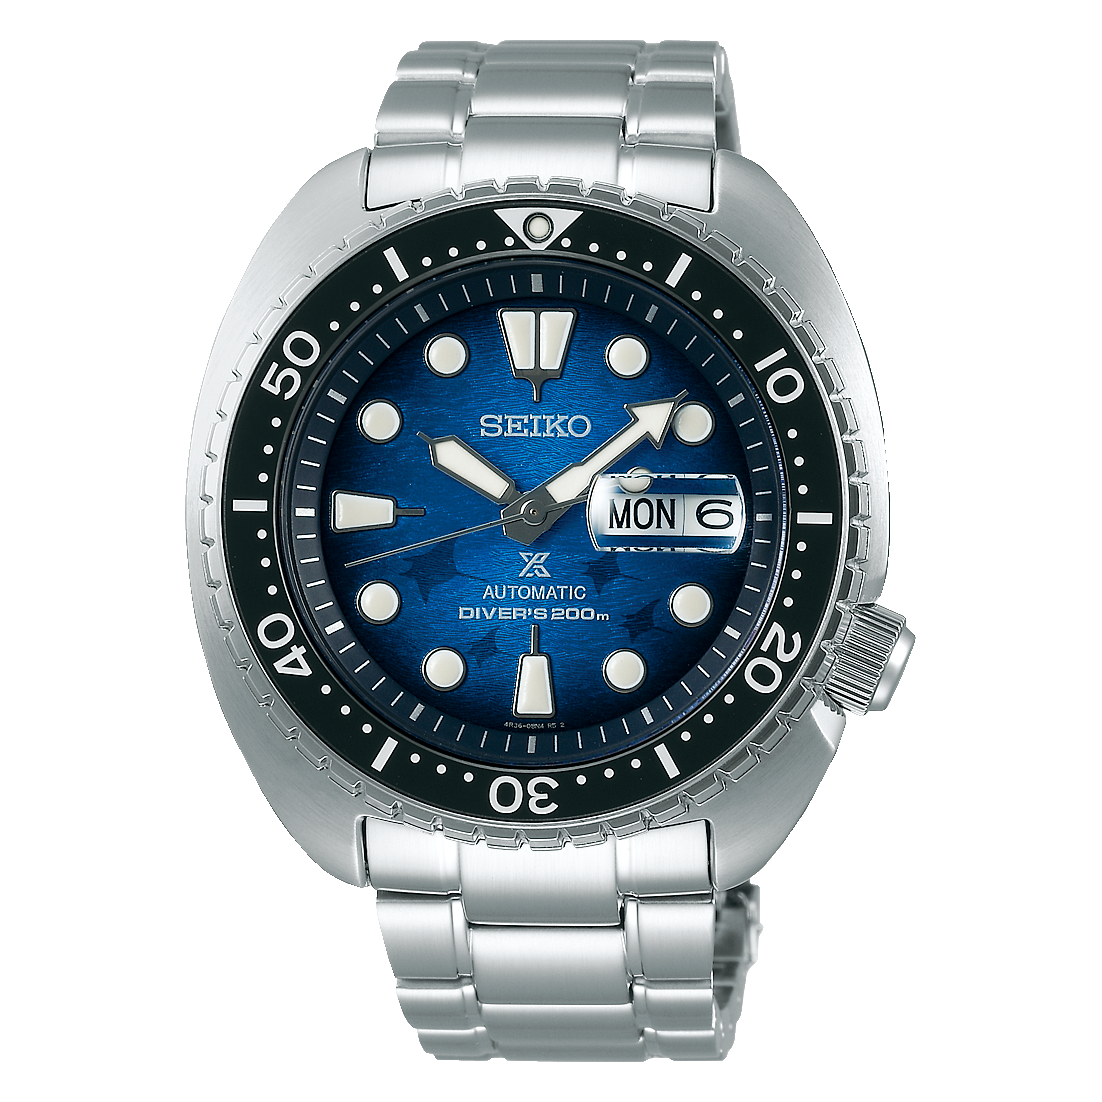 Prospex Automatic Save The Oceans Divers Watch SRPE39K1